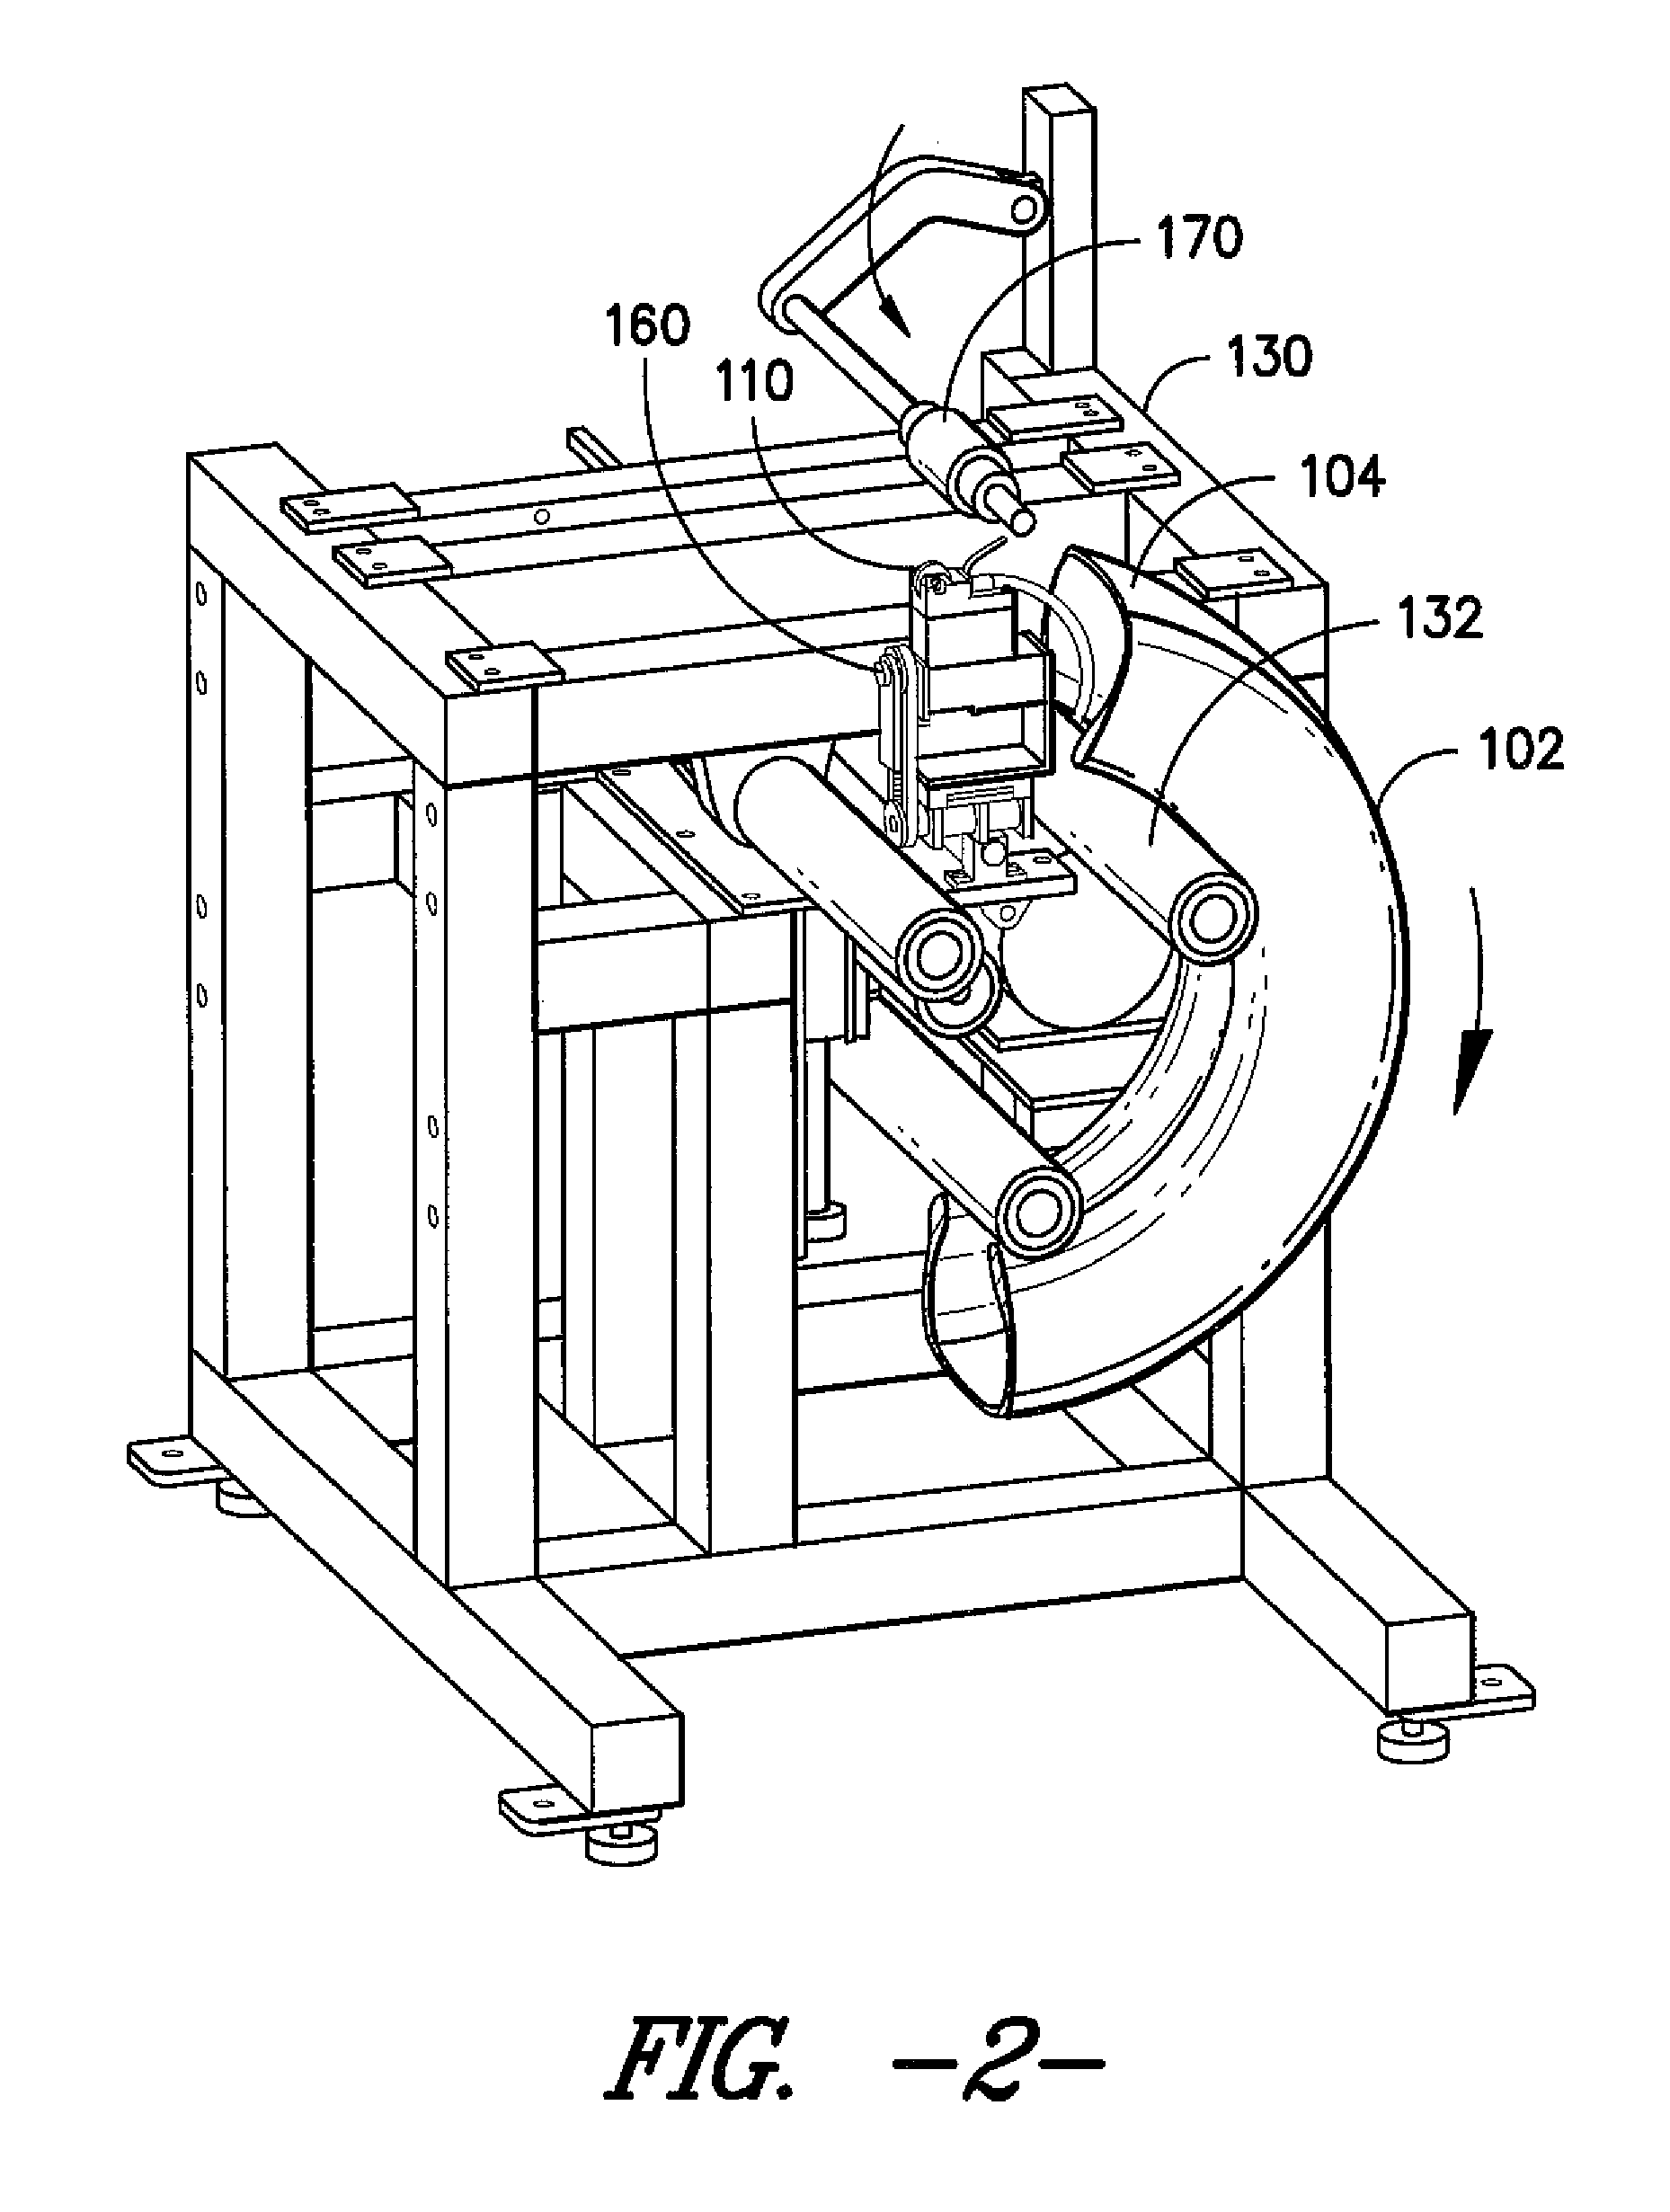 High voltage probe apparatus and method for tire inner surface anomaly detection